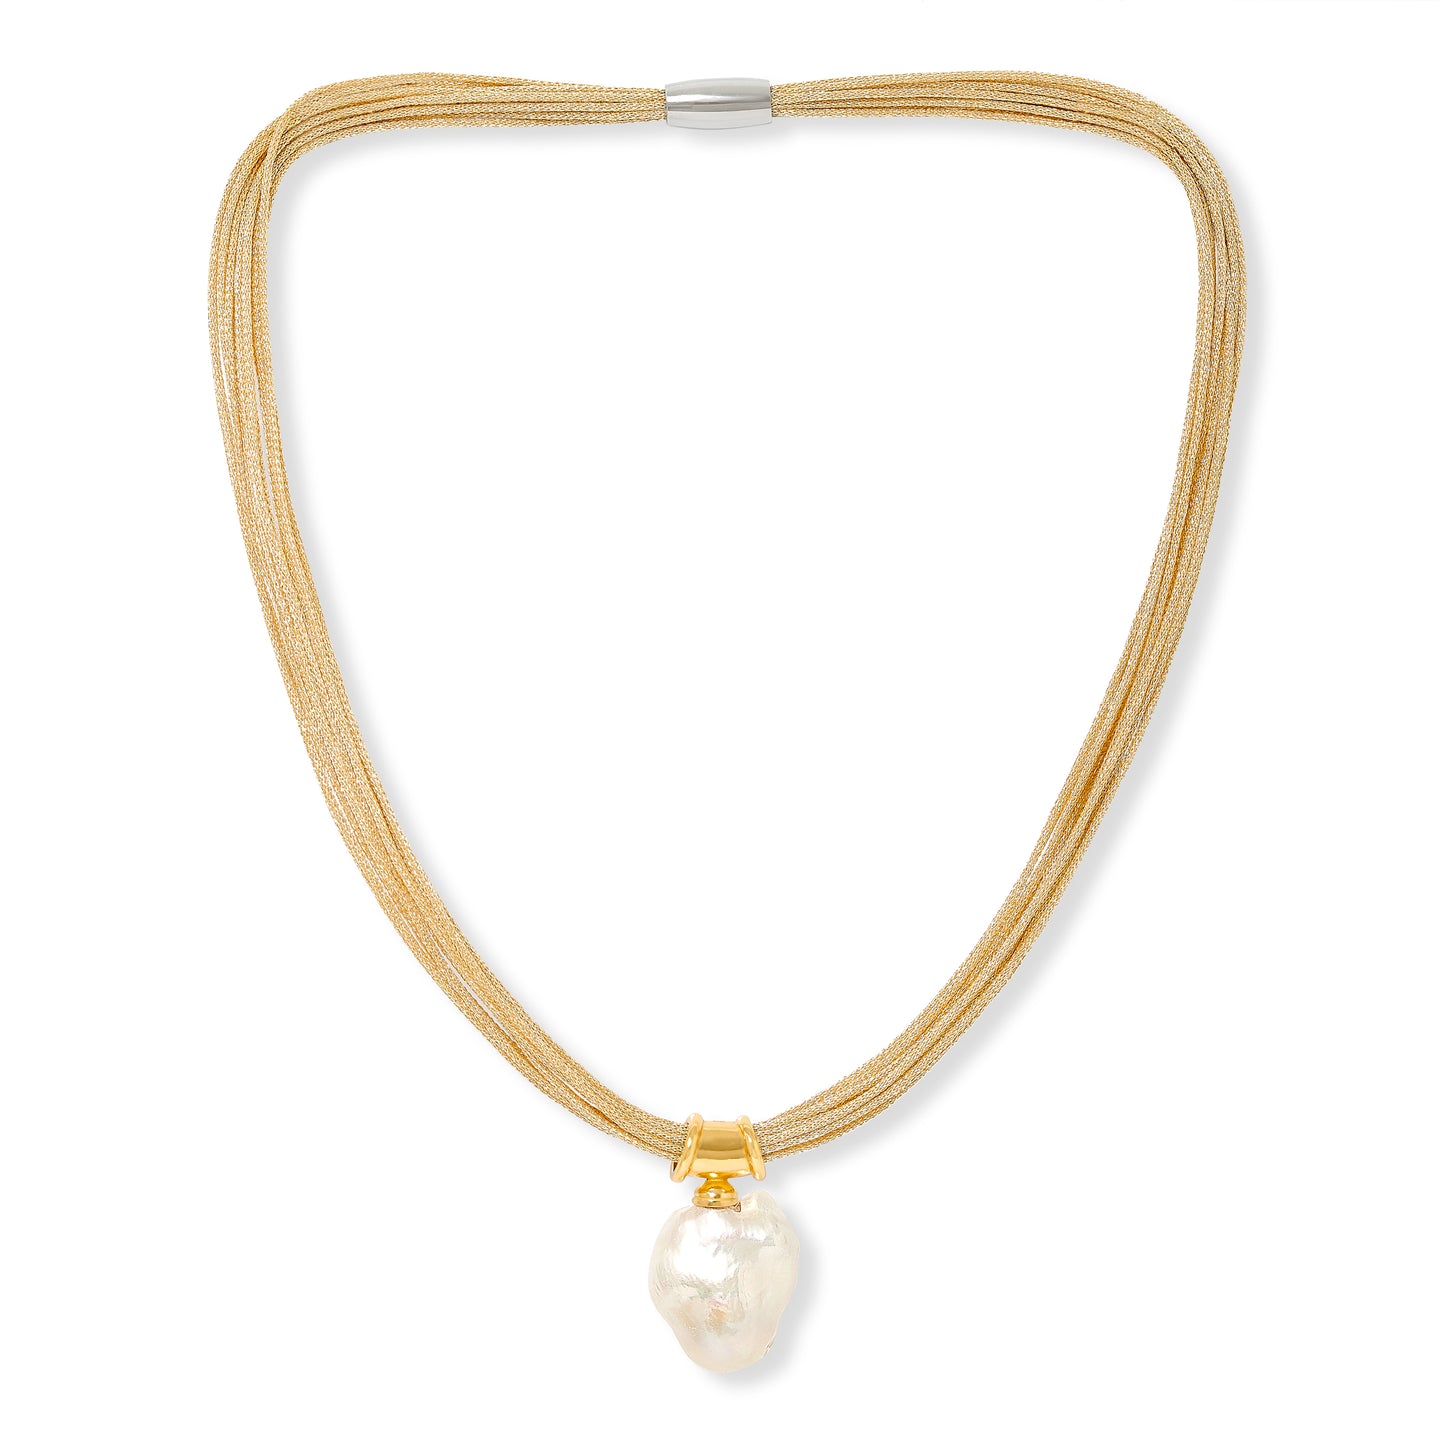 Decus large baroque 'fireball' cultured freshwater pearl drop on multi-strand gold necklace